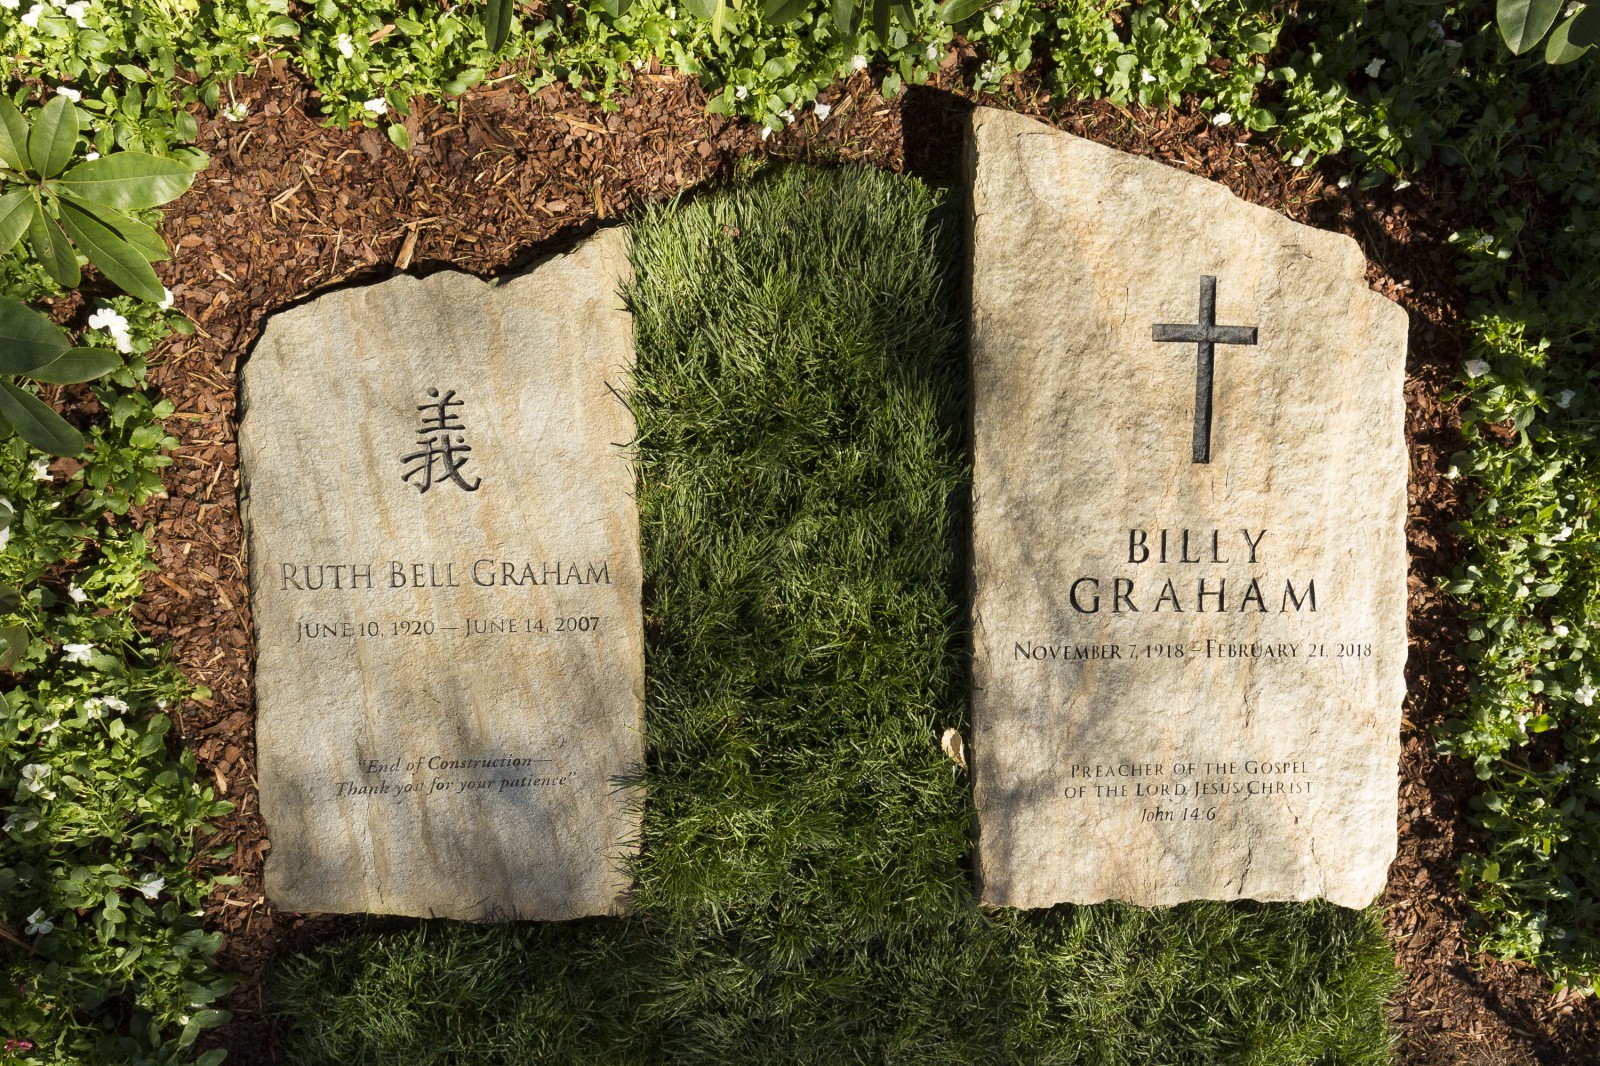 : A slab of North Carolina stone marks the grave of Billy Graham, buried next to his wife, Ruth, at the Prayer Garden located next to the Billy Graham Library in Charlotte. The marker inscription bears the text, "Preacher of the Gospel of the Lord Jesus Christ" with the Scripture reference, John 14:6. (Billy Graham's Grave Marker)